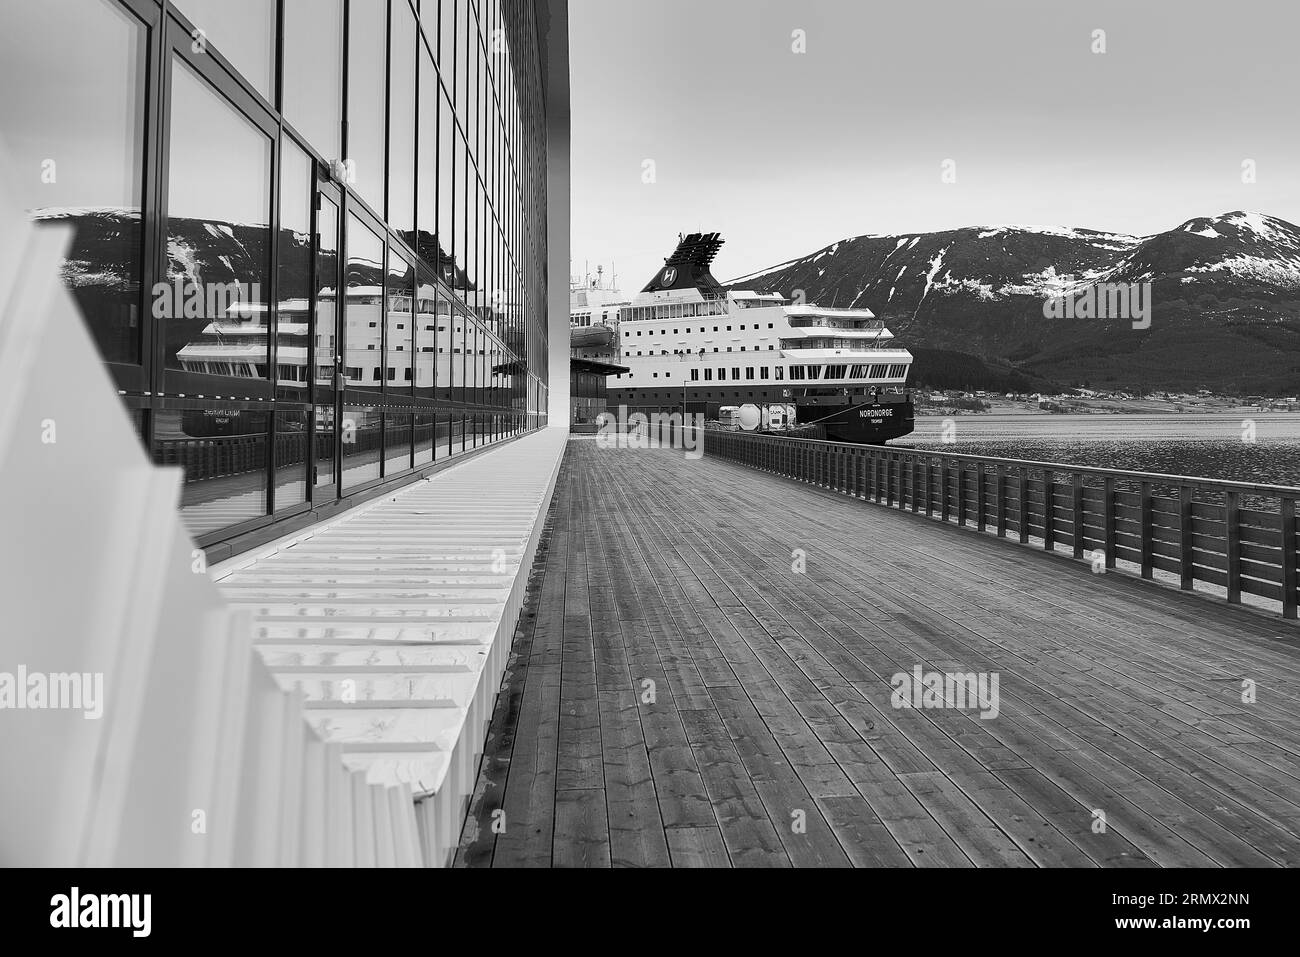 Black And White Photo Of The Contemporary Norwegian Coastal Express Museum Containing The Historic Vesterålen Steamship Company Ship MS Finnmarken Stock Photo